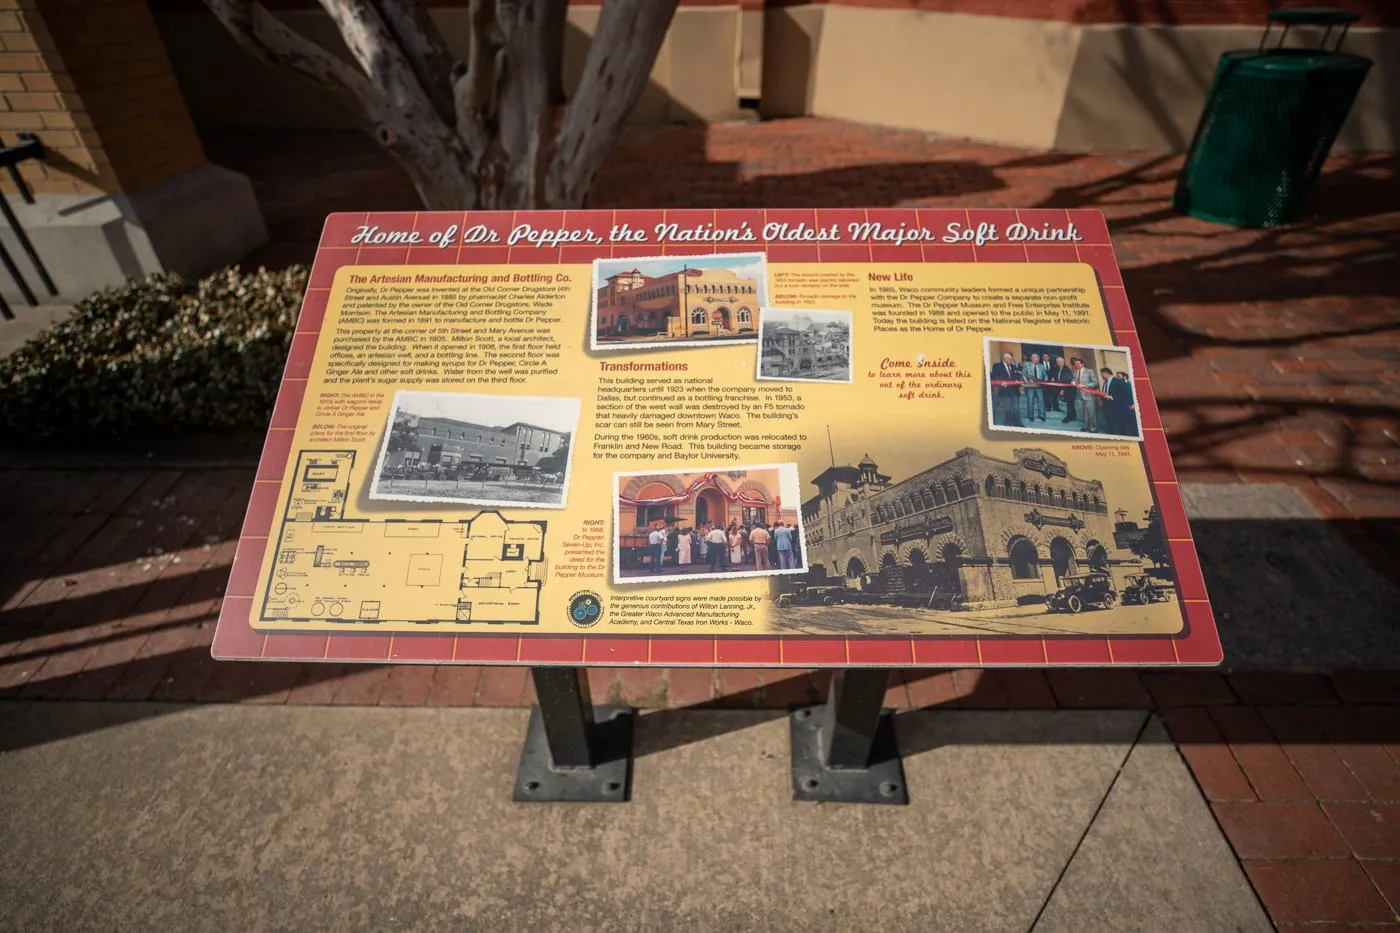 Dr Pepper Museum in Waco, Texas